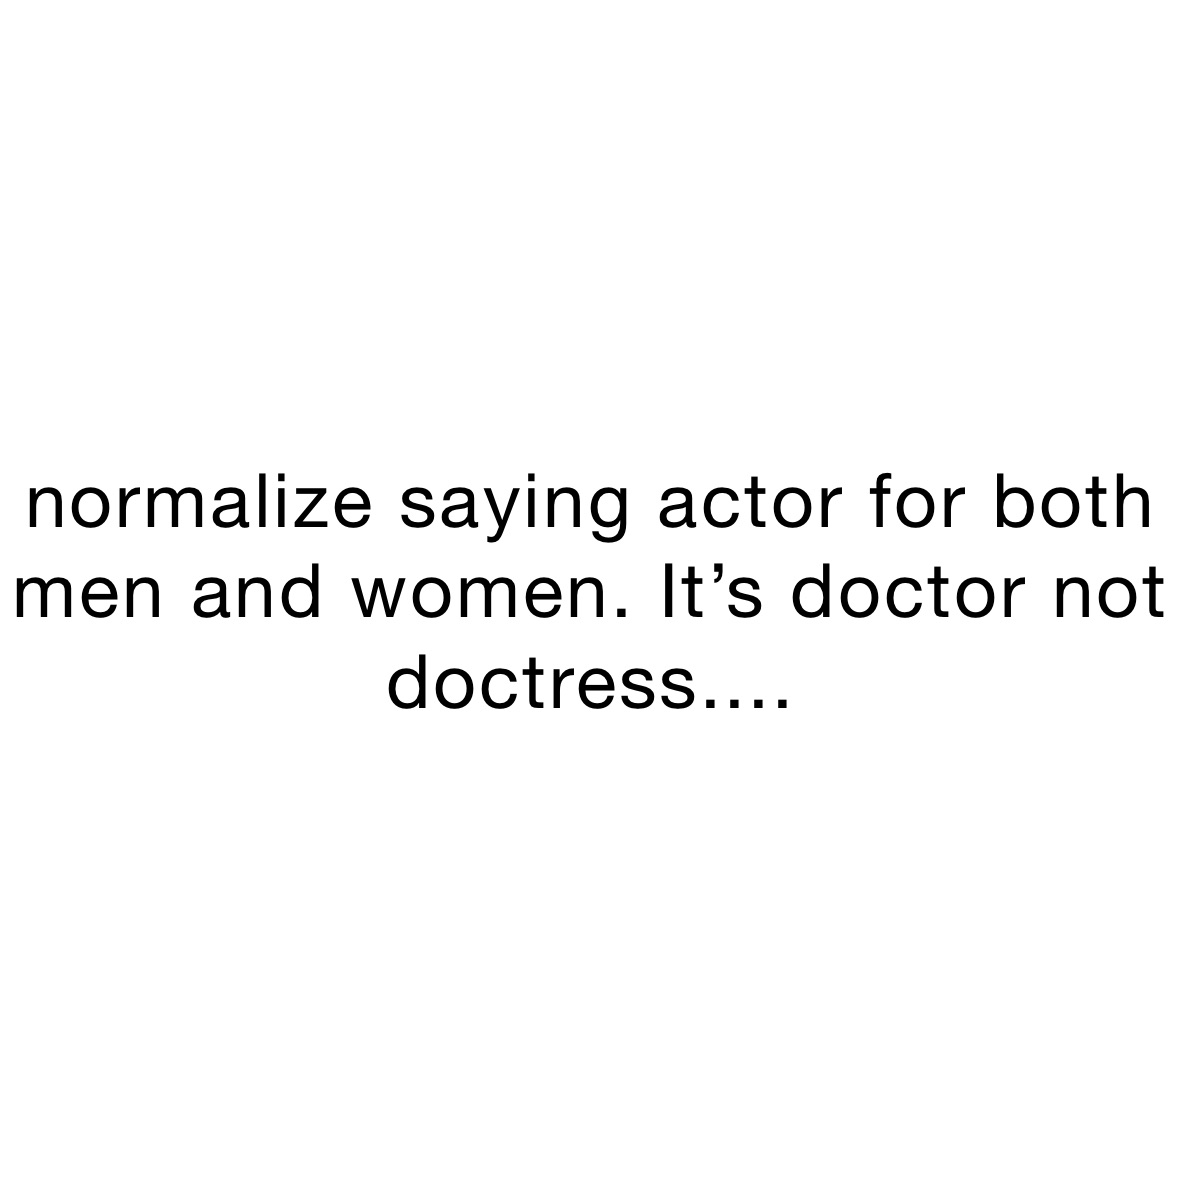 normalize saying actor for both men and women. It’s doctor not  doctress....